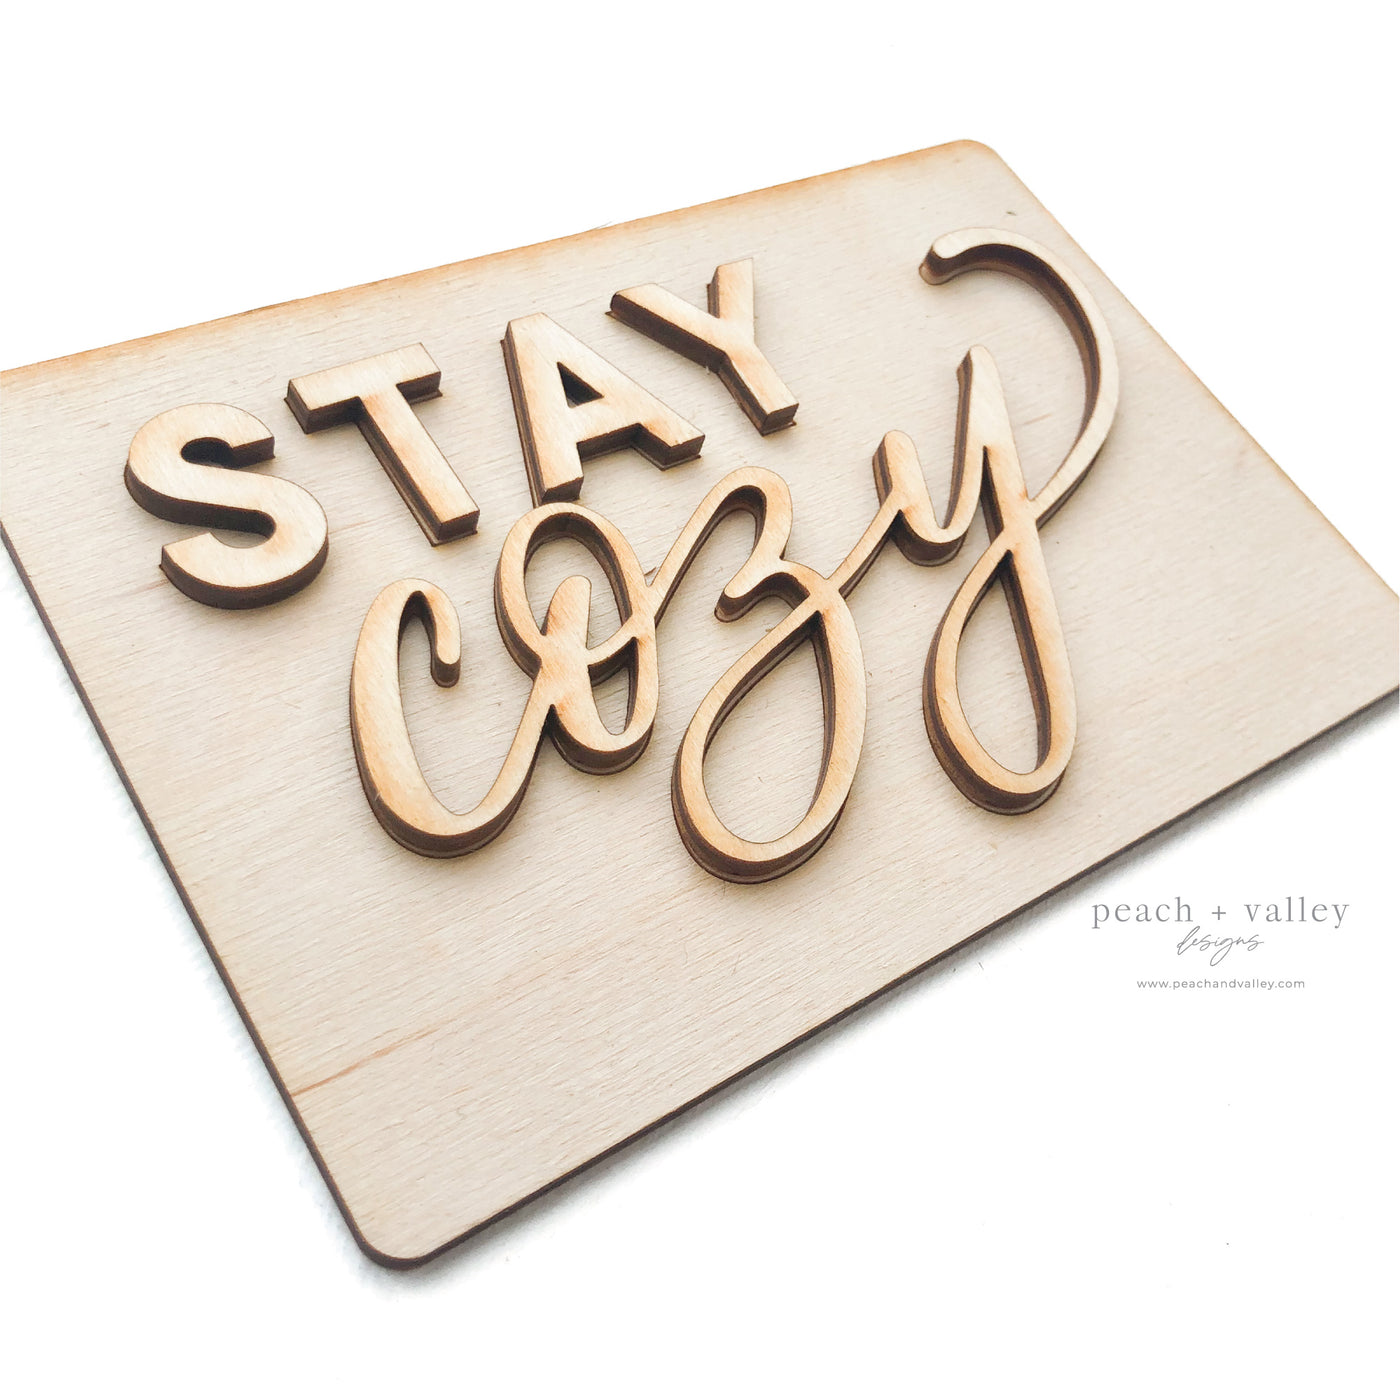 Stay Cozy Sign Blank